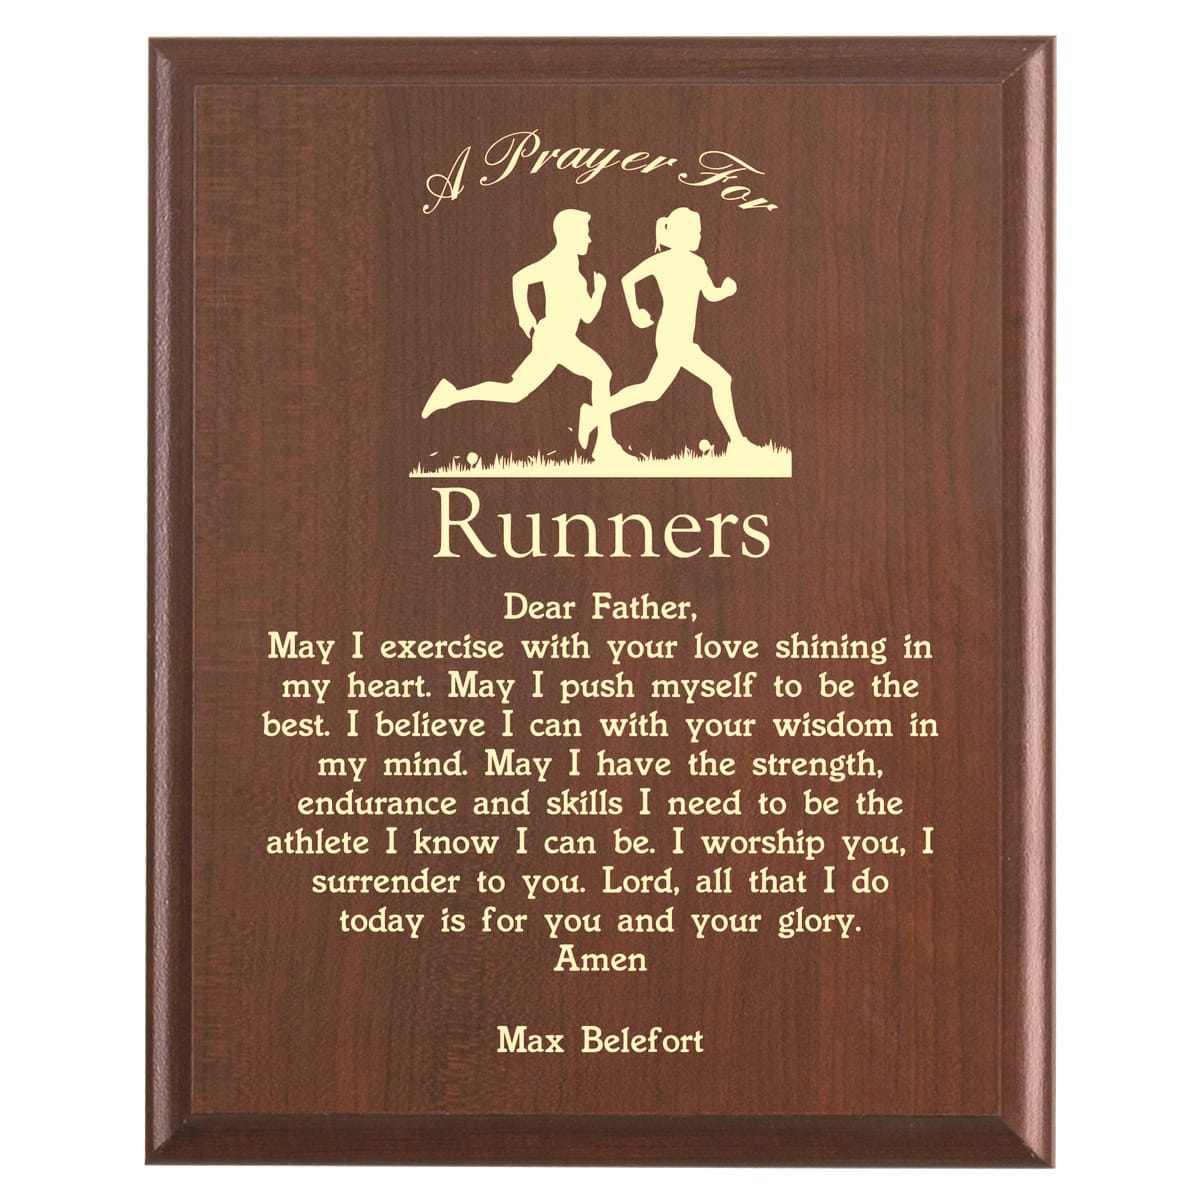 Plaque photo: Jogger Prayer Plaque design with free personalization. Wood style finish with customized text.